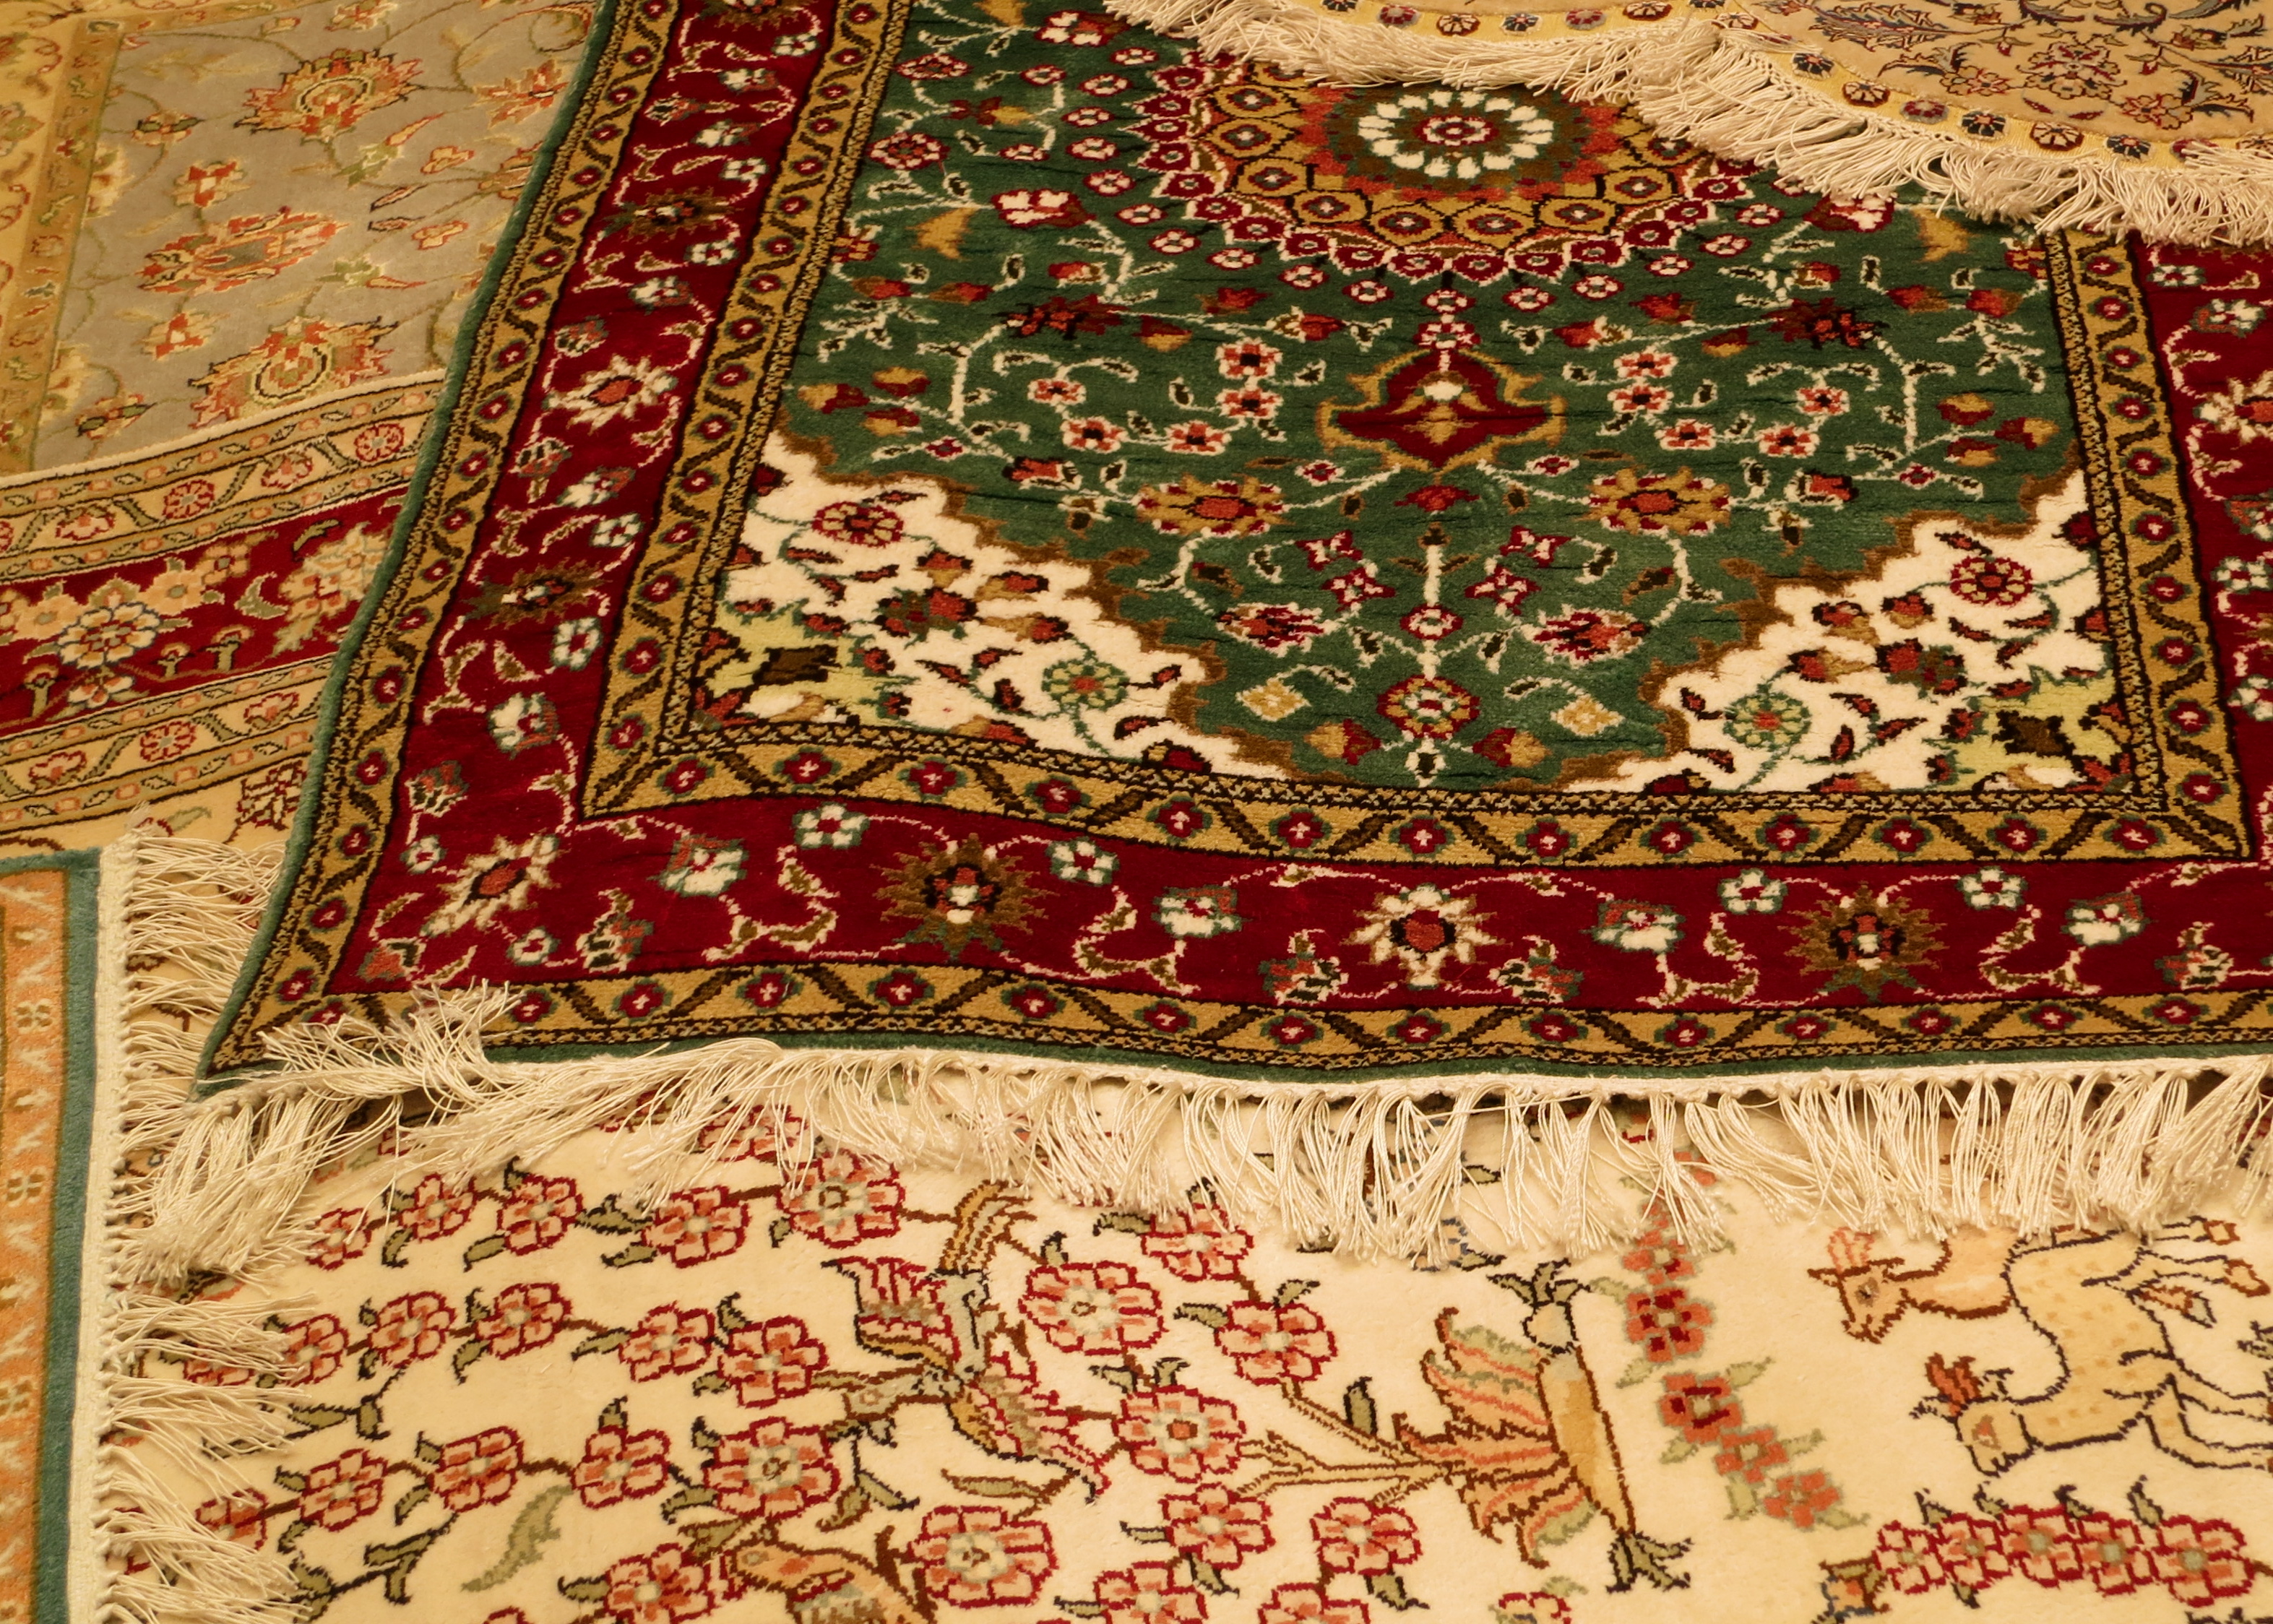 Dozens of Turkish rugs were scattered on the floor in Kusadasi, Turkey, thrown out in a frenzy of encouraging us to buy.